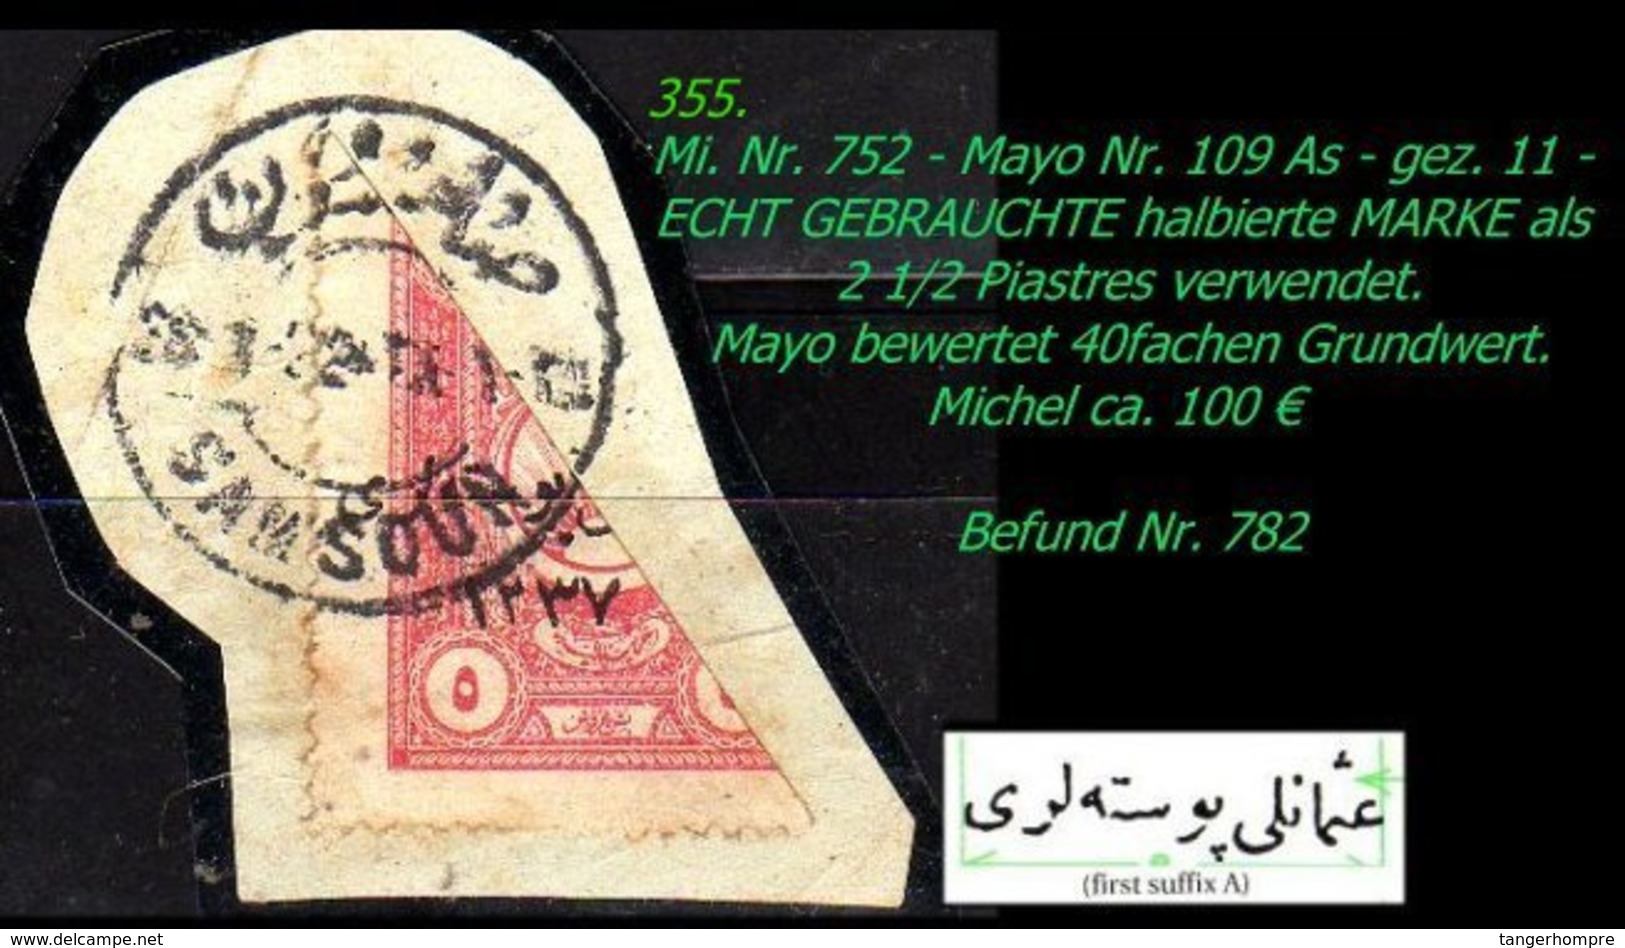 EARLY OTTOMAN SPECIALIZED FOR SPECIALIST, SEE...Mi. Nr. 752 - Mayo 109 As - Halbierung -R- - 1920-21 Anatolie